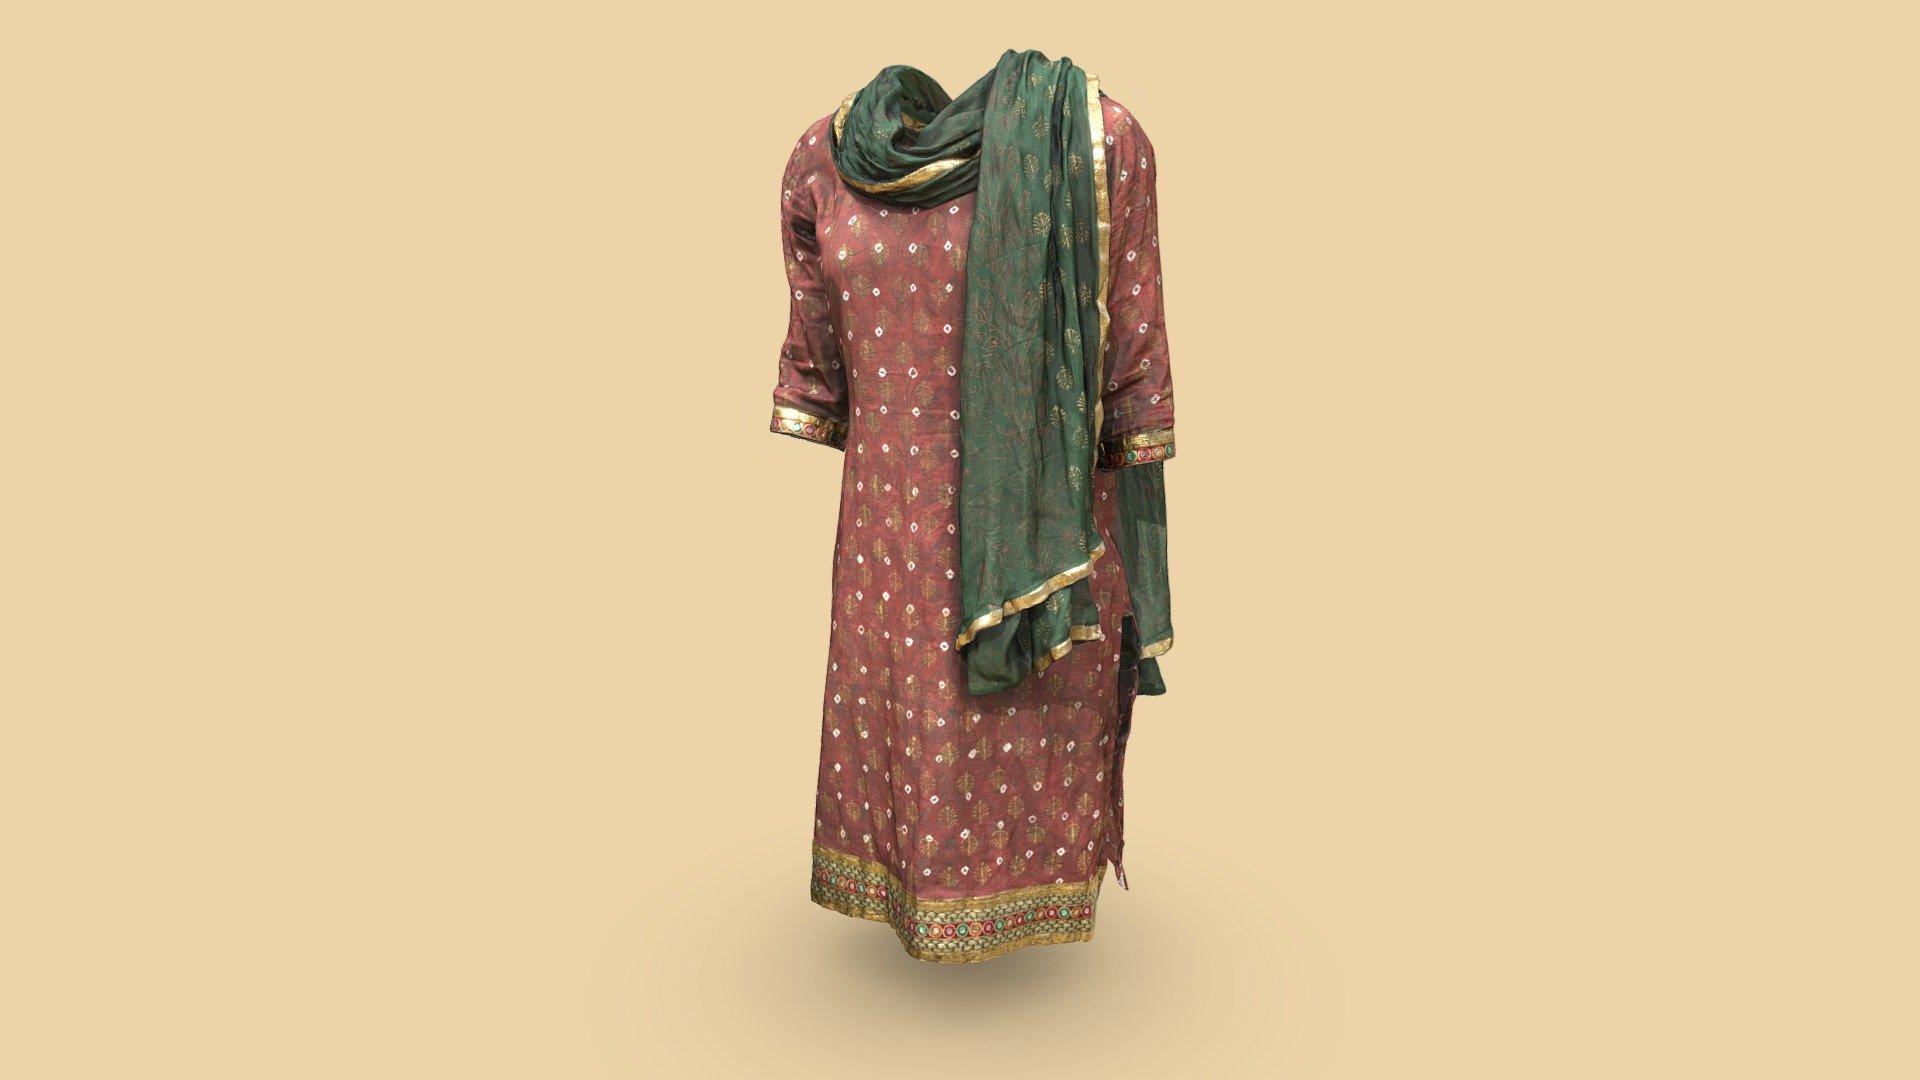 Thought i'd submit one of my favorite articles of clothing for this challenge :) - Salwar Kameez #AgisoftClothesChallenge - 3D model by Kazi (@adishakti) 3d model